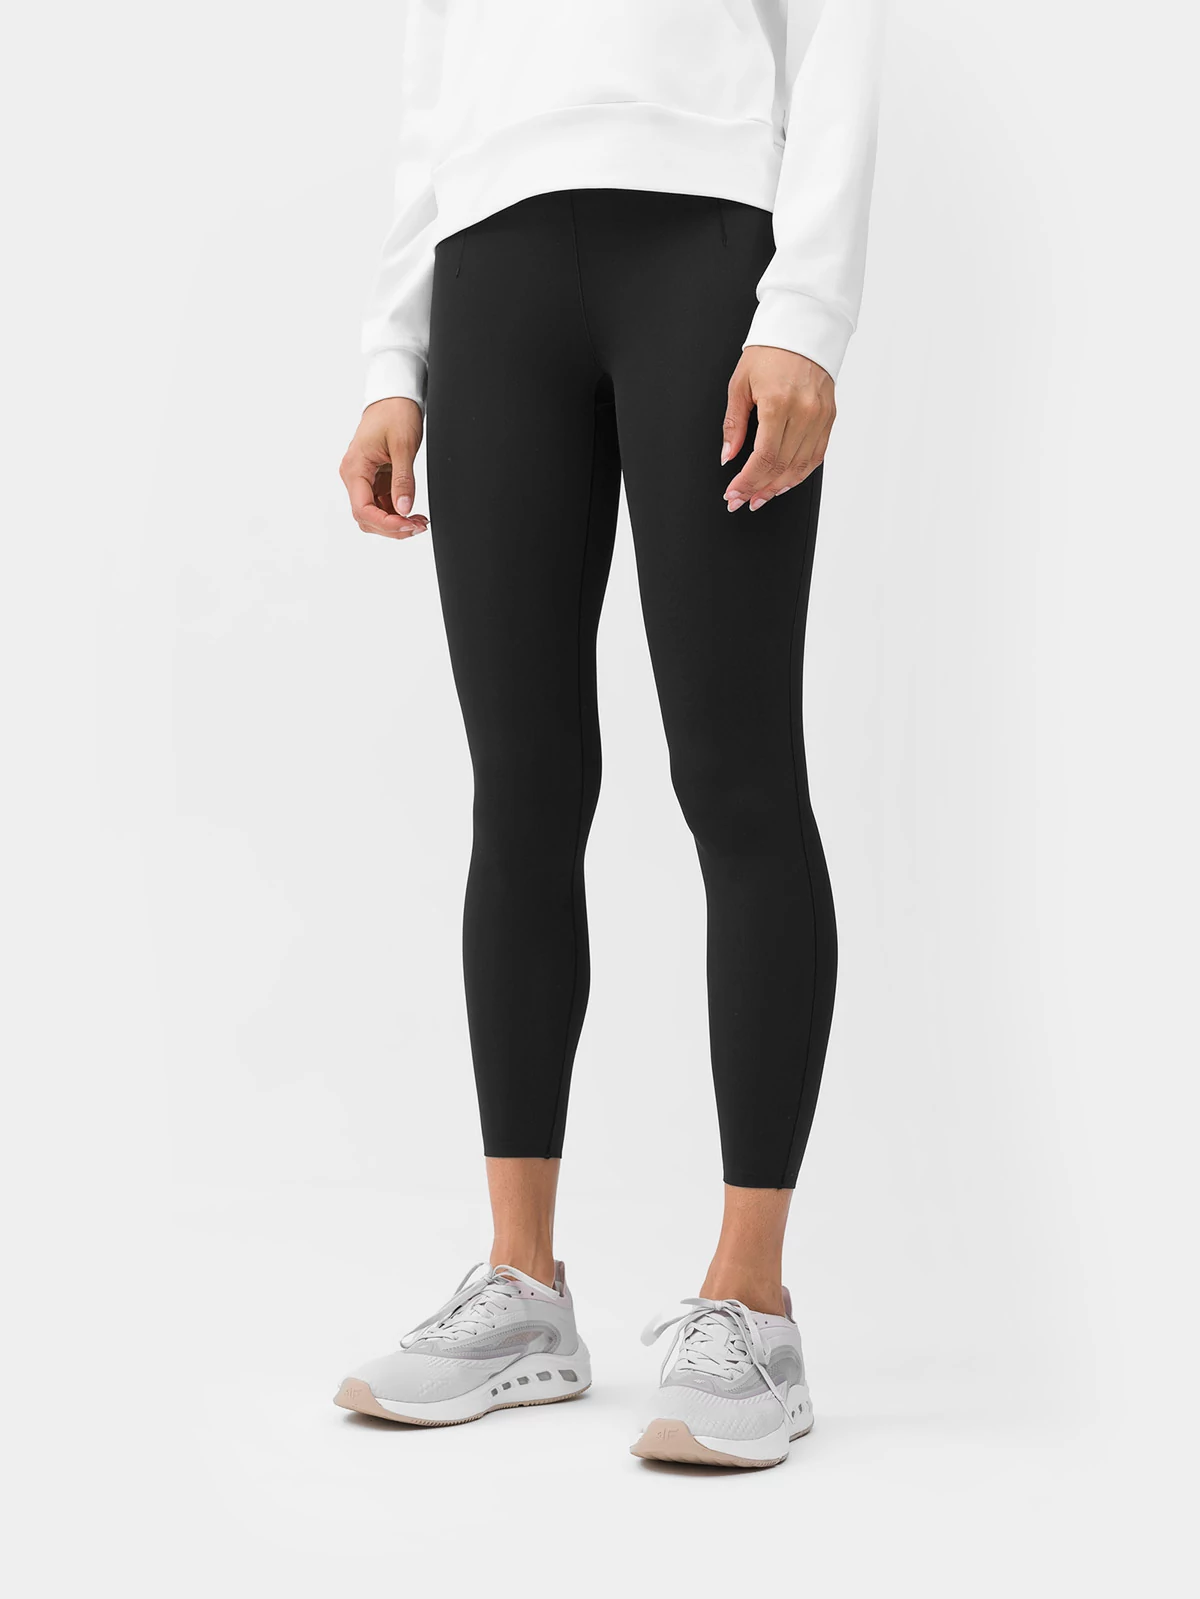 Women's 4FPRO recovery compression leggings